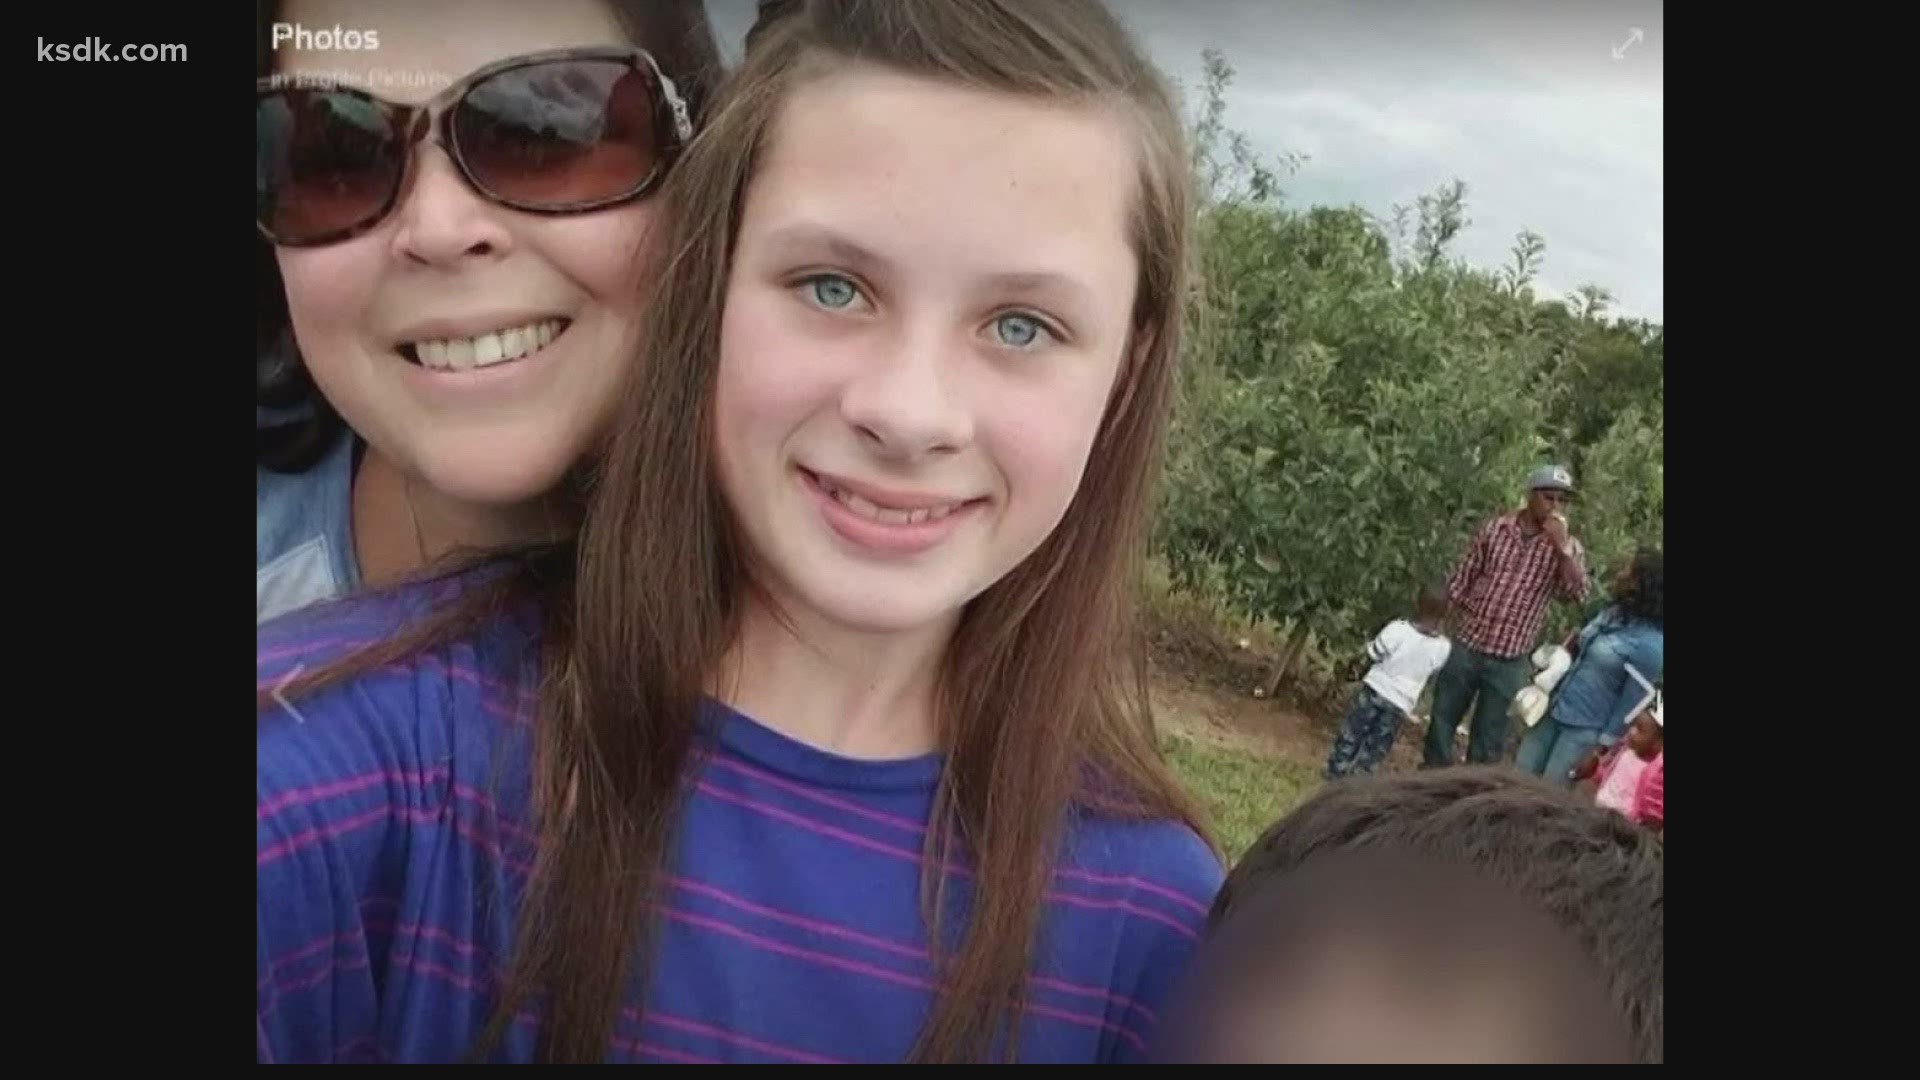 Amber Hampshire hid her daughter's disease for years, covering up the diagnosis until the 14-year-old died of diabetic ketoacidosis